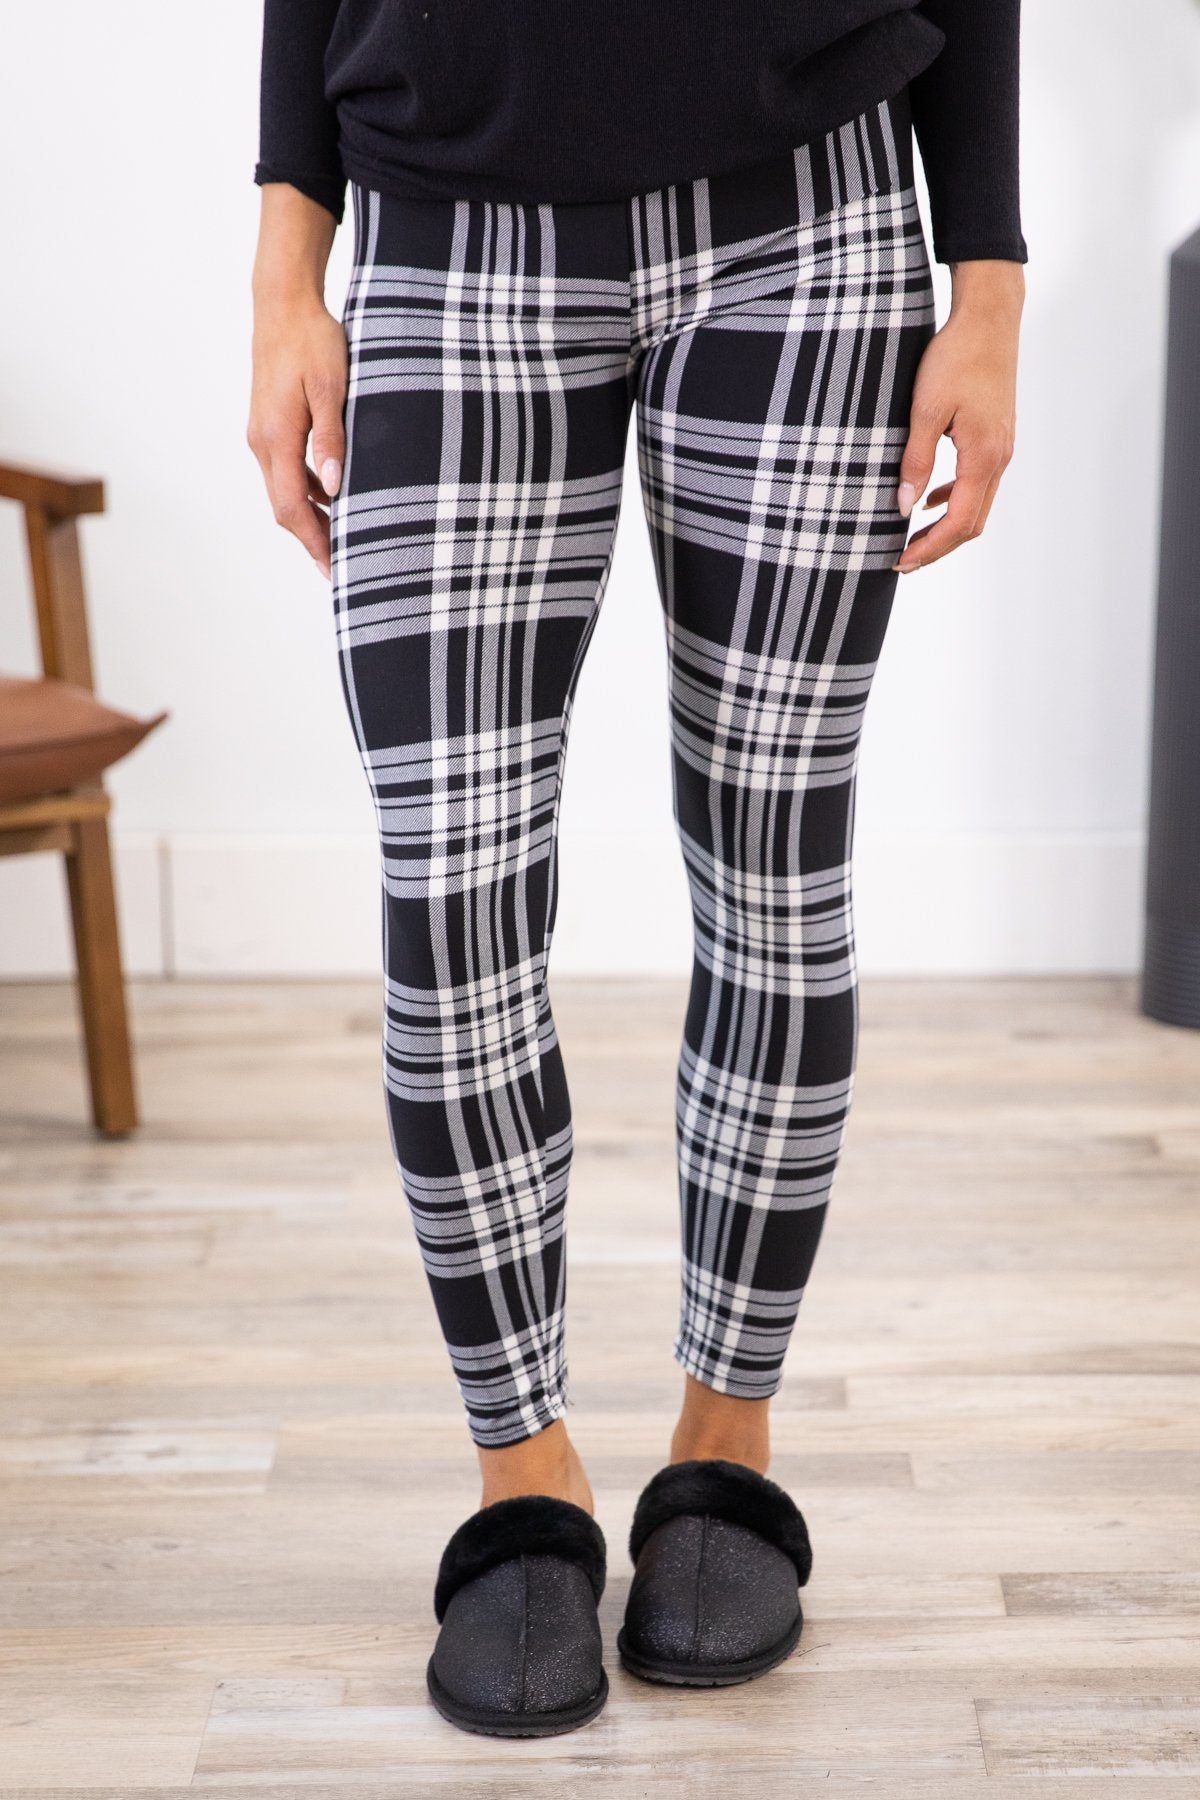 Black and White Plaid Leggings - Filly Flair